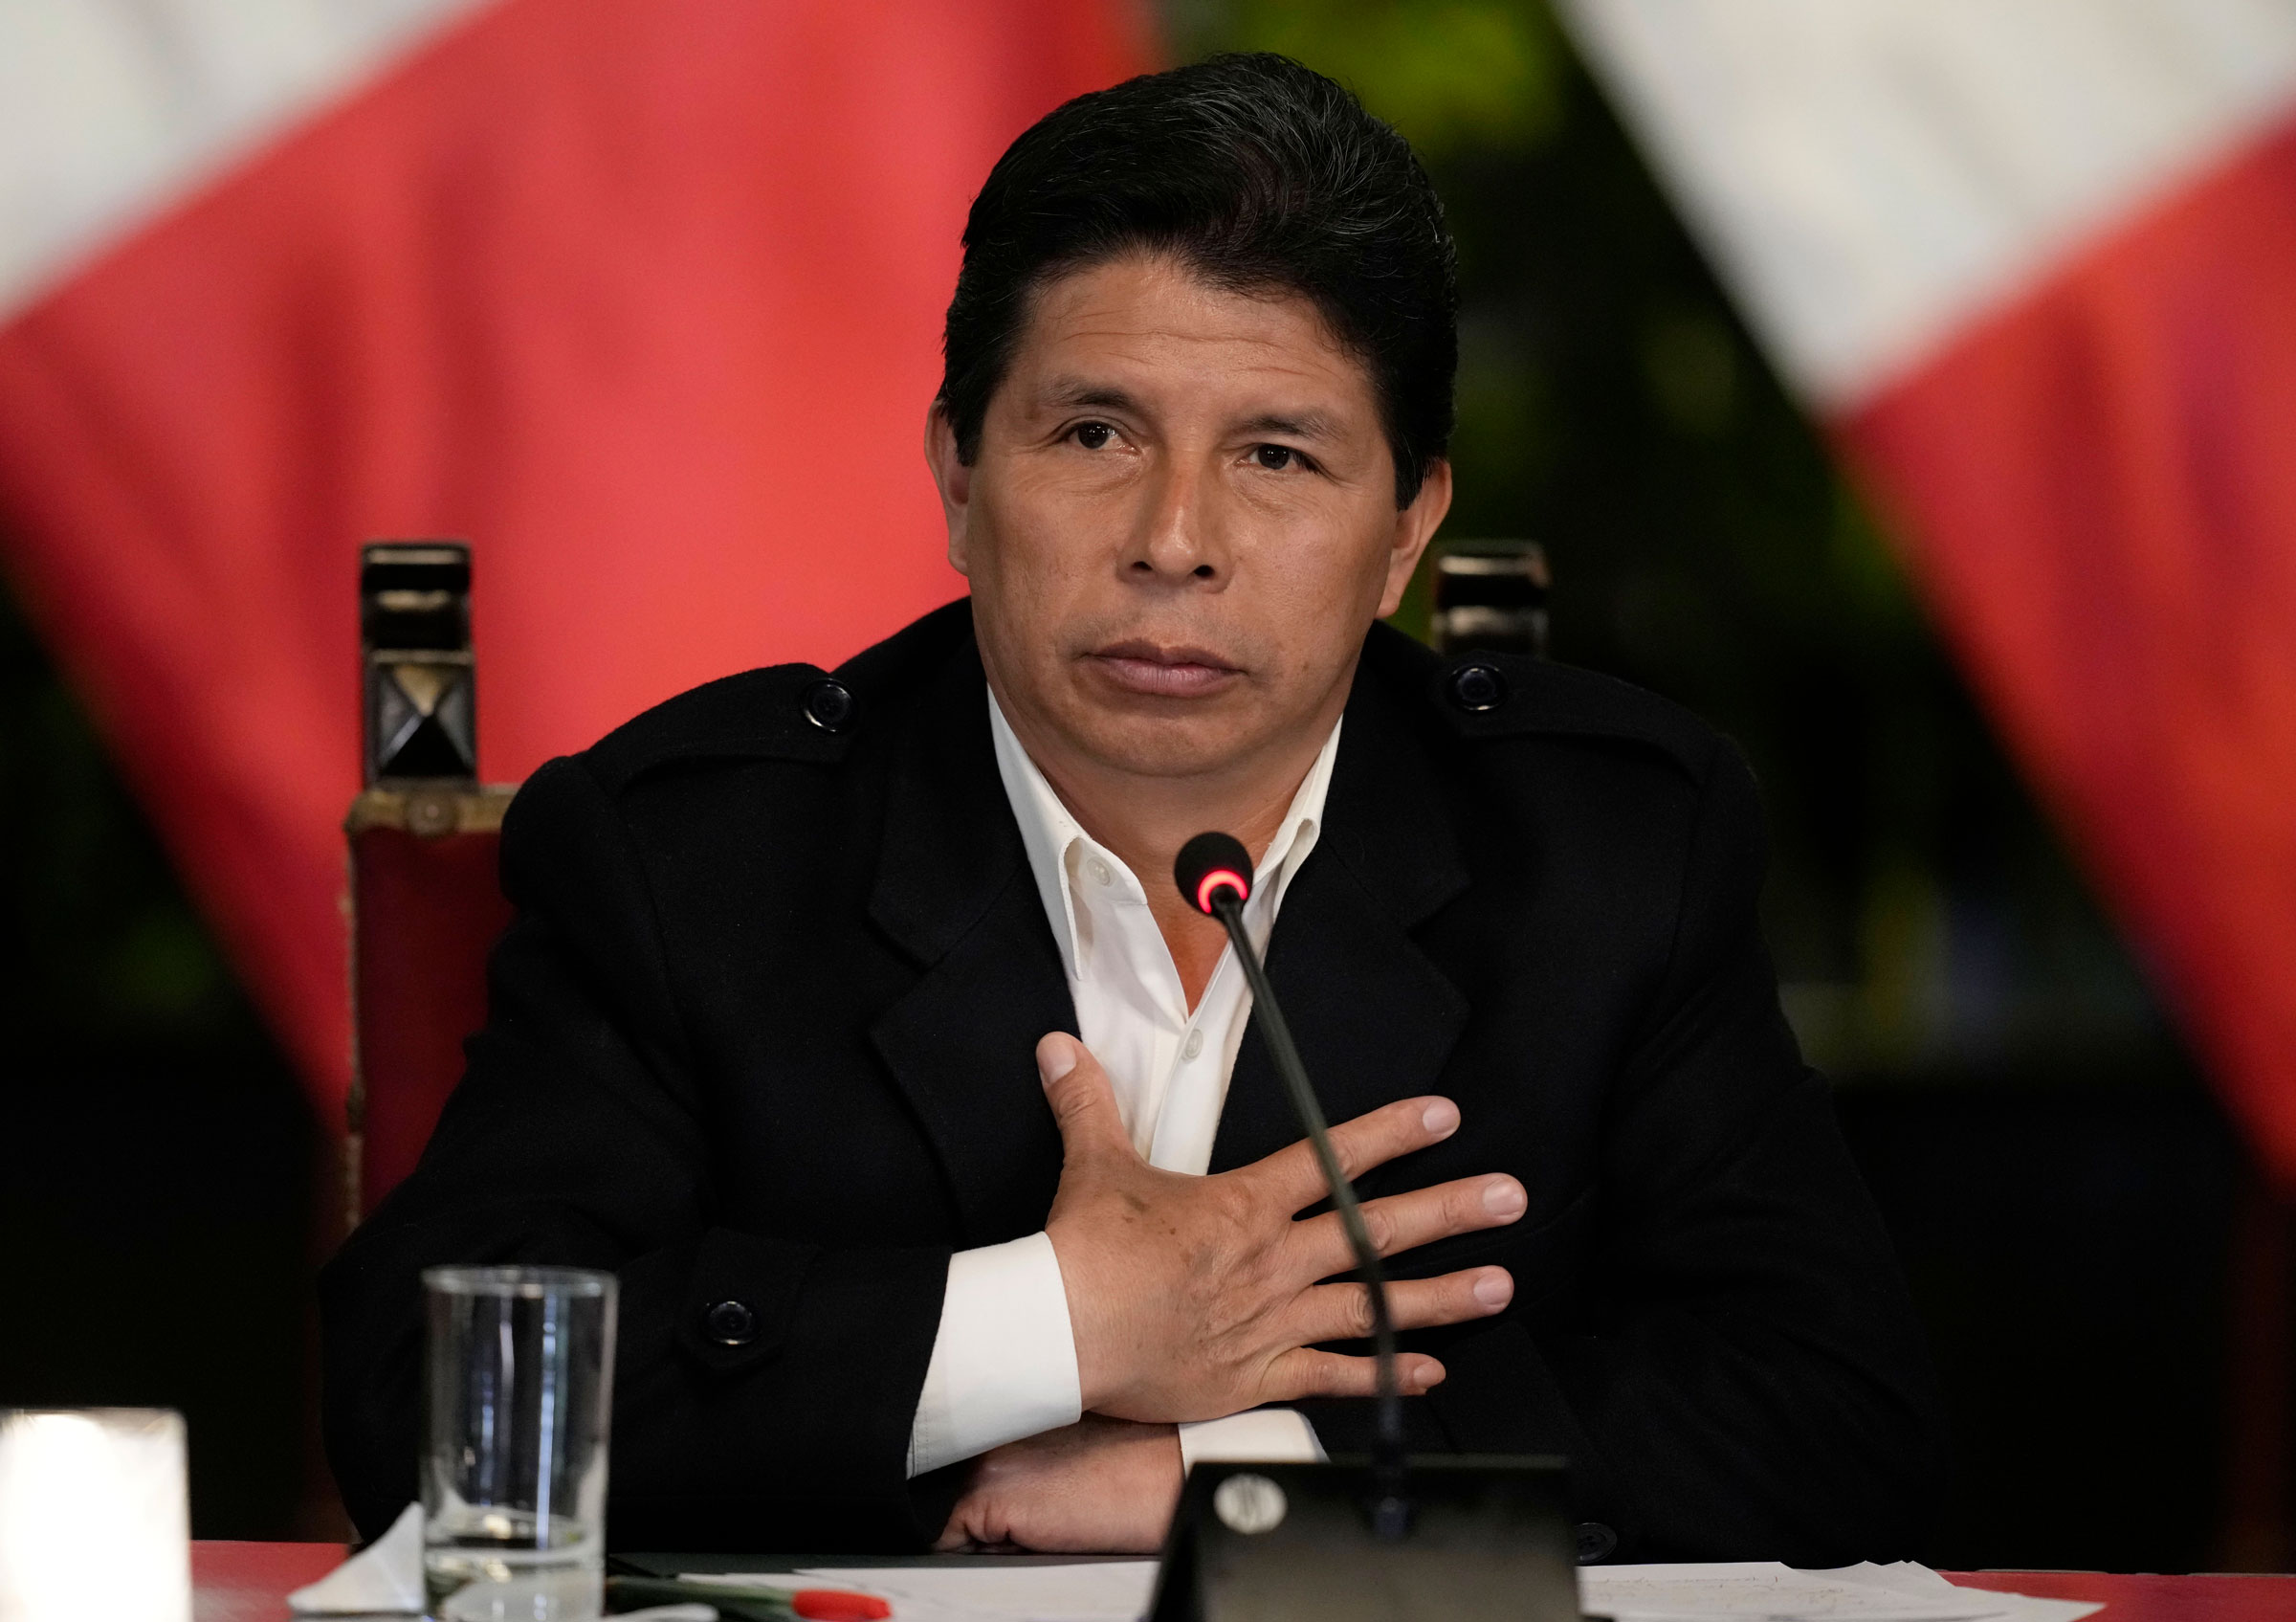 Peruvian President Pedro Castillo gives a press conference at the presidential palace in Lima